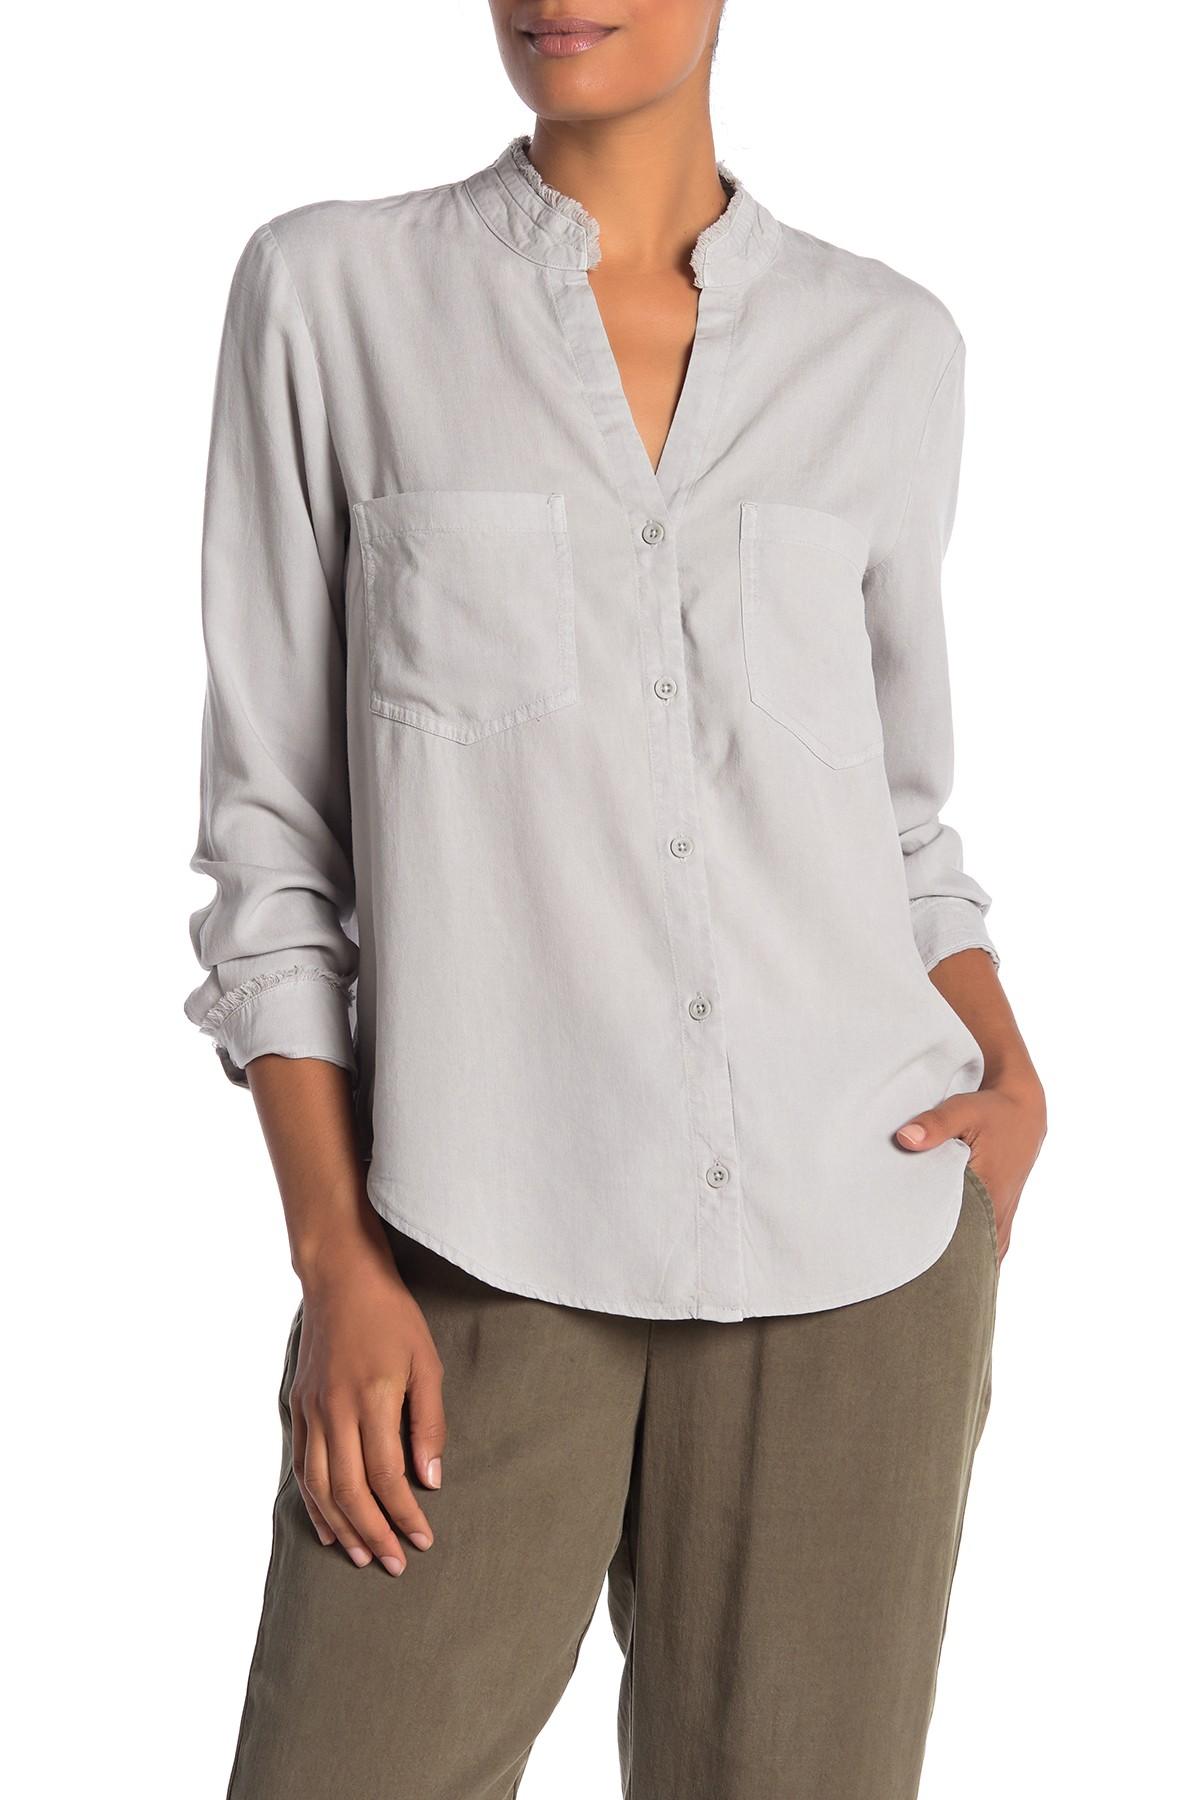 Cloth & Stone Two Pocket Button Down Shirt | Lyst